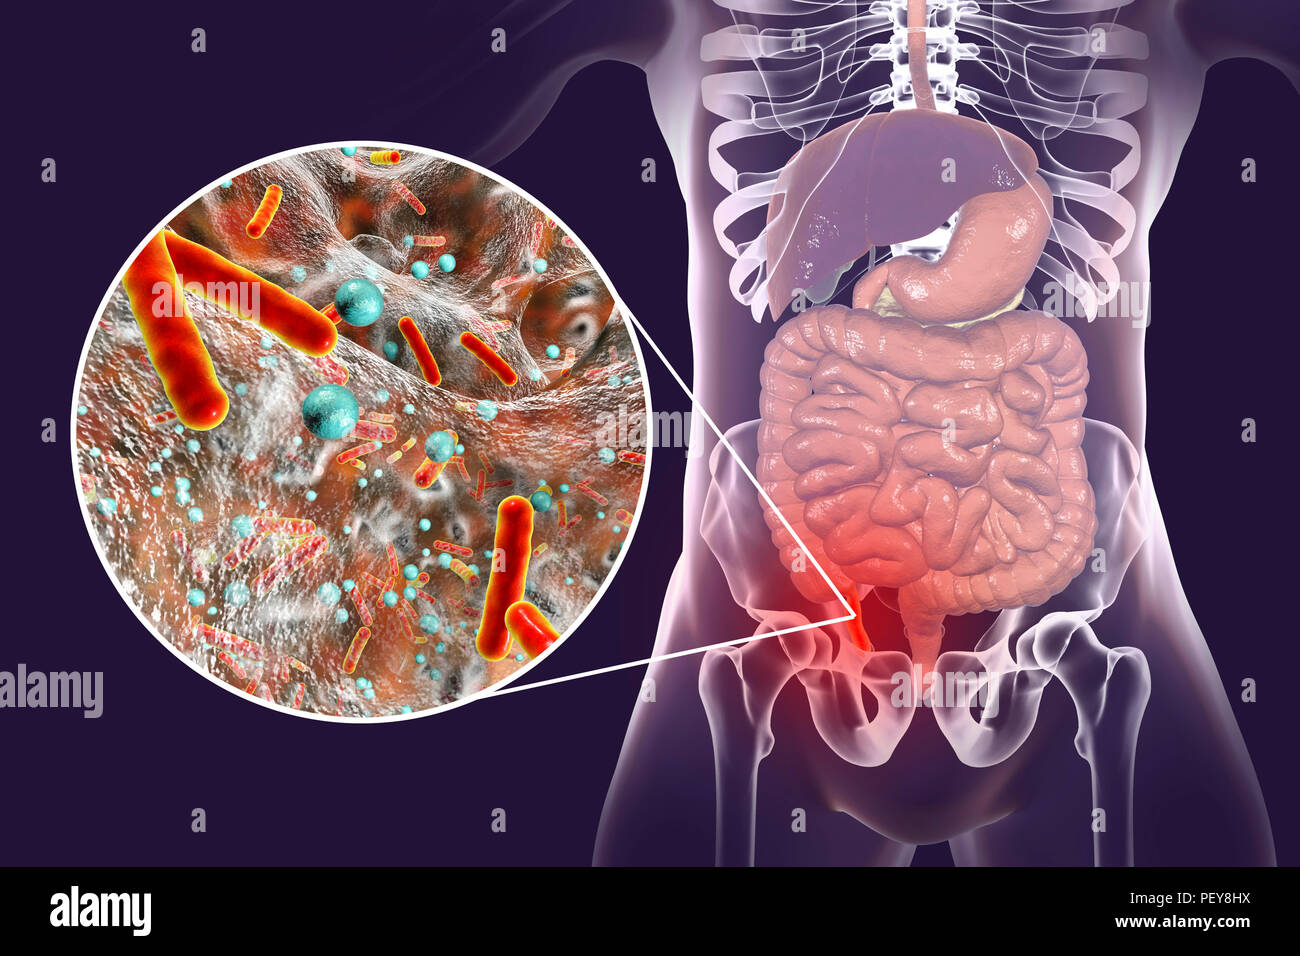 Appendicitis. Illustration of a human appendix, showing it red and inflamed in appendicitis and a close-up view of bacteria, the causative agents of appendicitis. The most common microorganisms recovered from appendix with acute appendicitis are Escherichia coli and Bacteroides sp., the less commonly found are, Klebsiella pneumoniae, Streptococcus sp. Enterococcus sp. Pseudomonas aeruginosa and other bacteria. Stock Photo